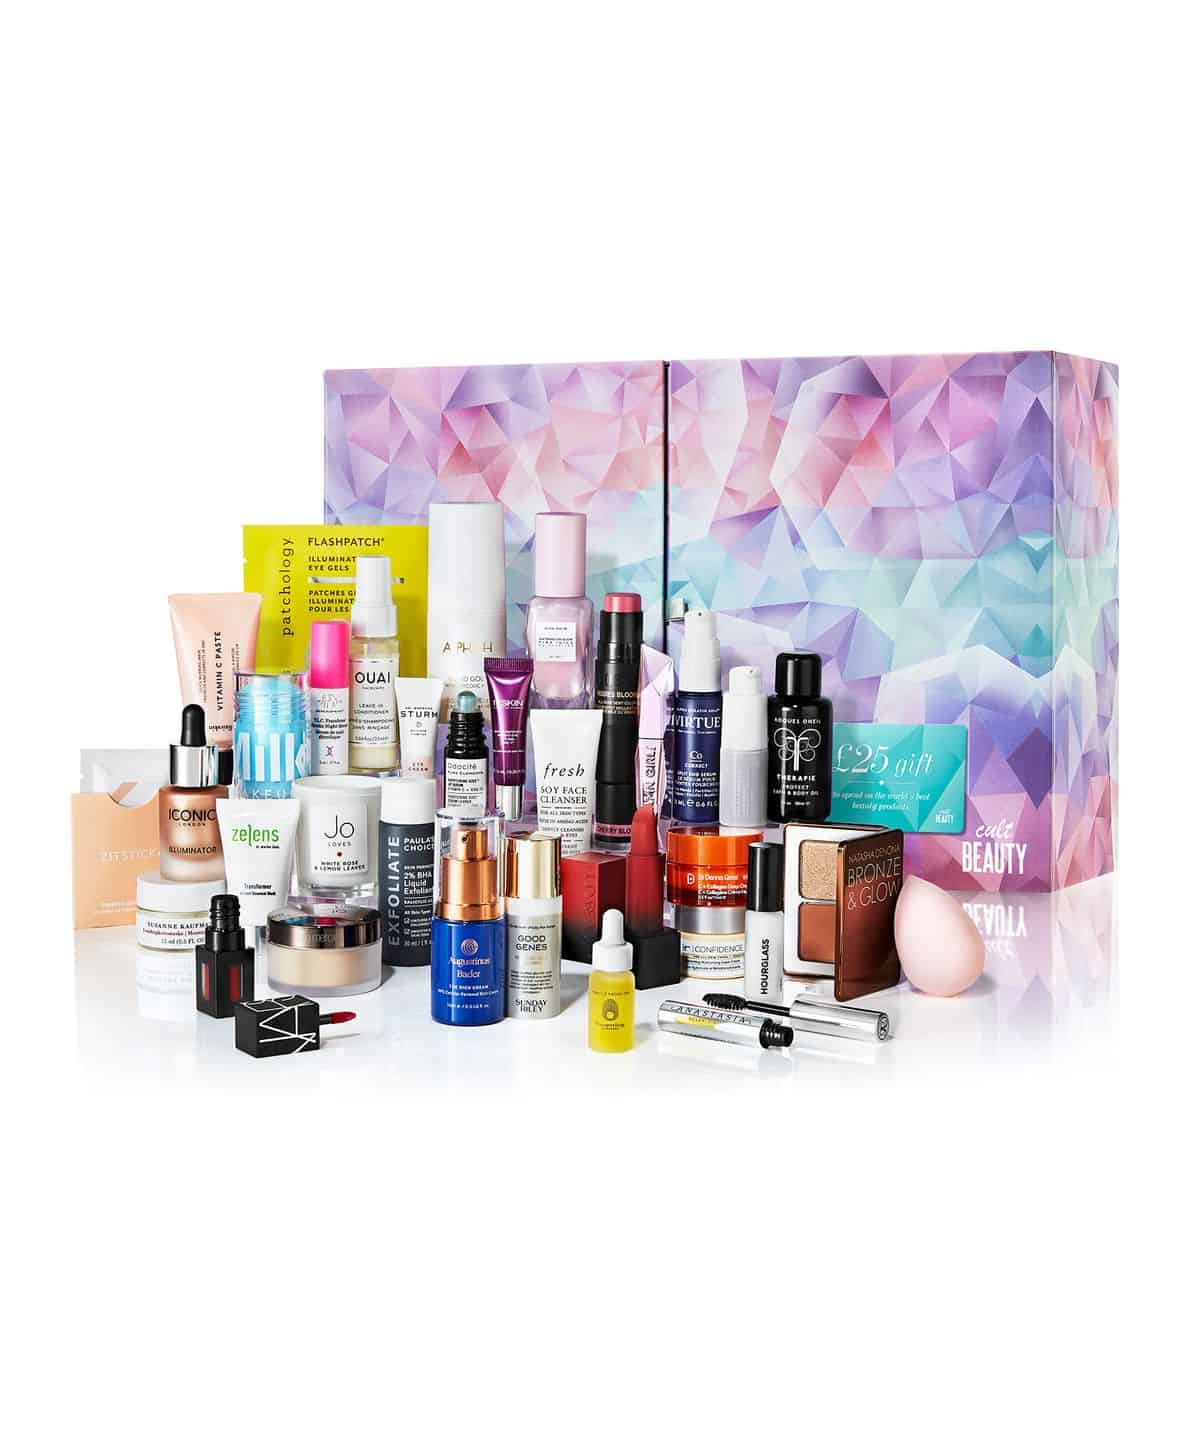 Cult Beauty Advent Calendar Reviews Get All The Details At Hello